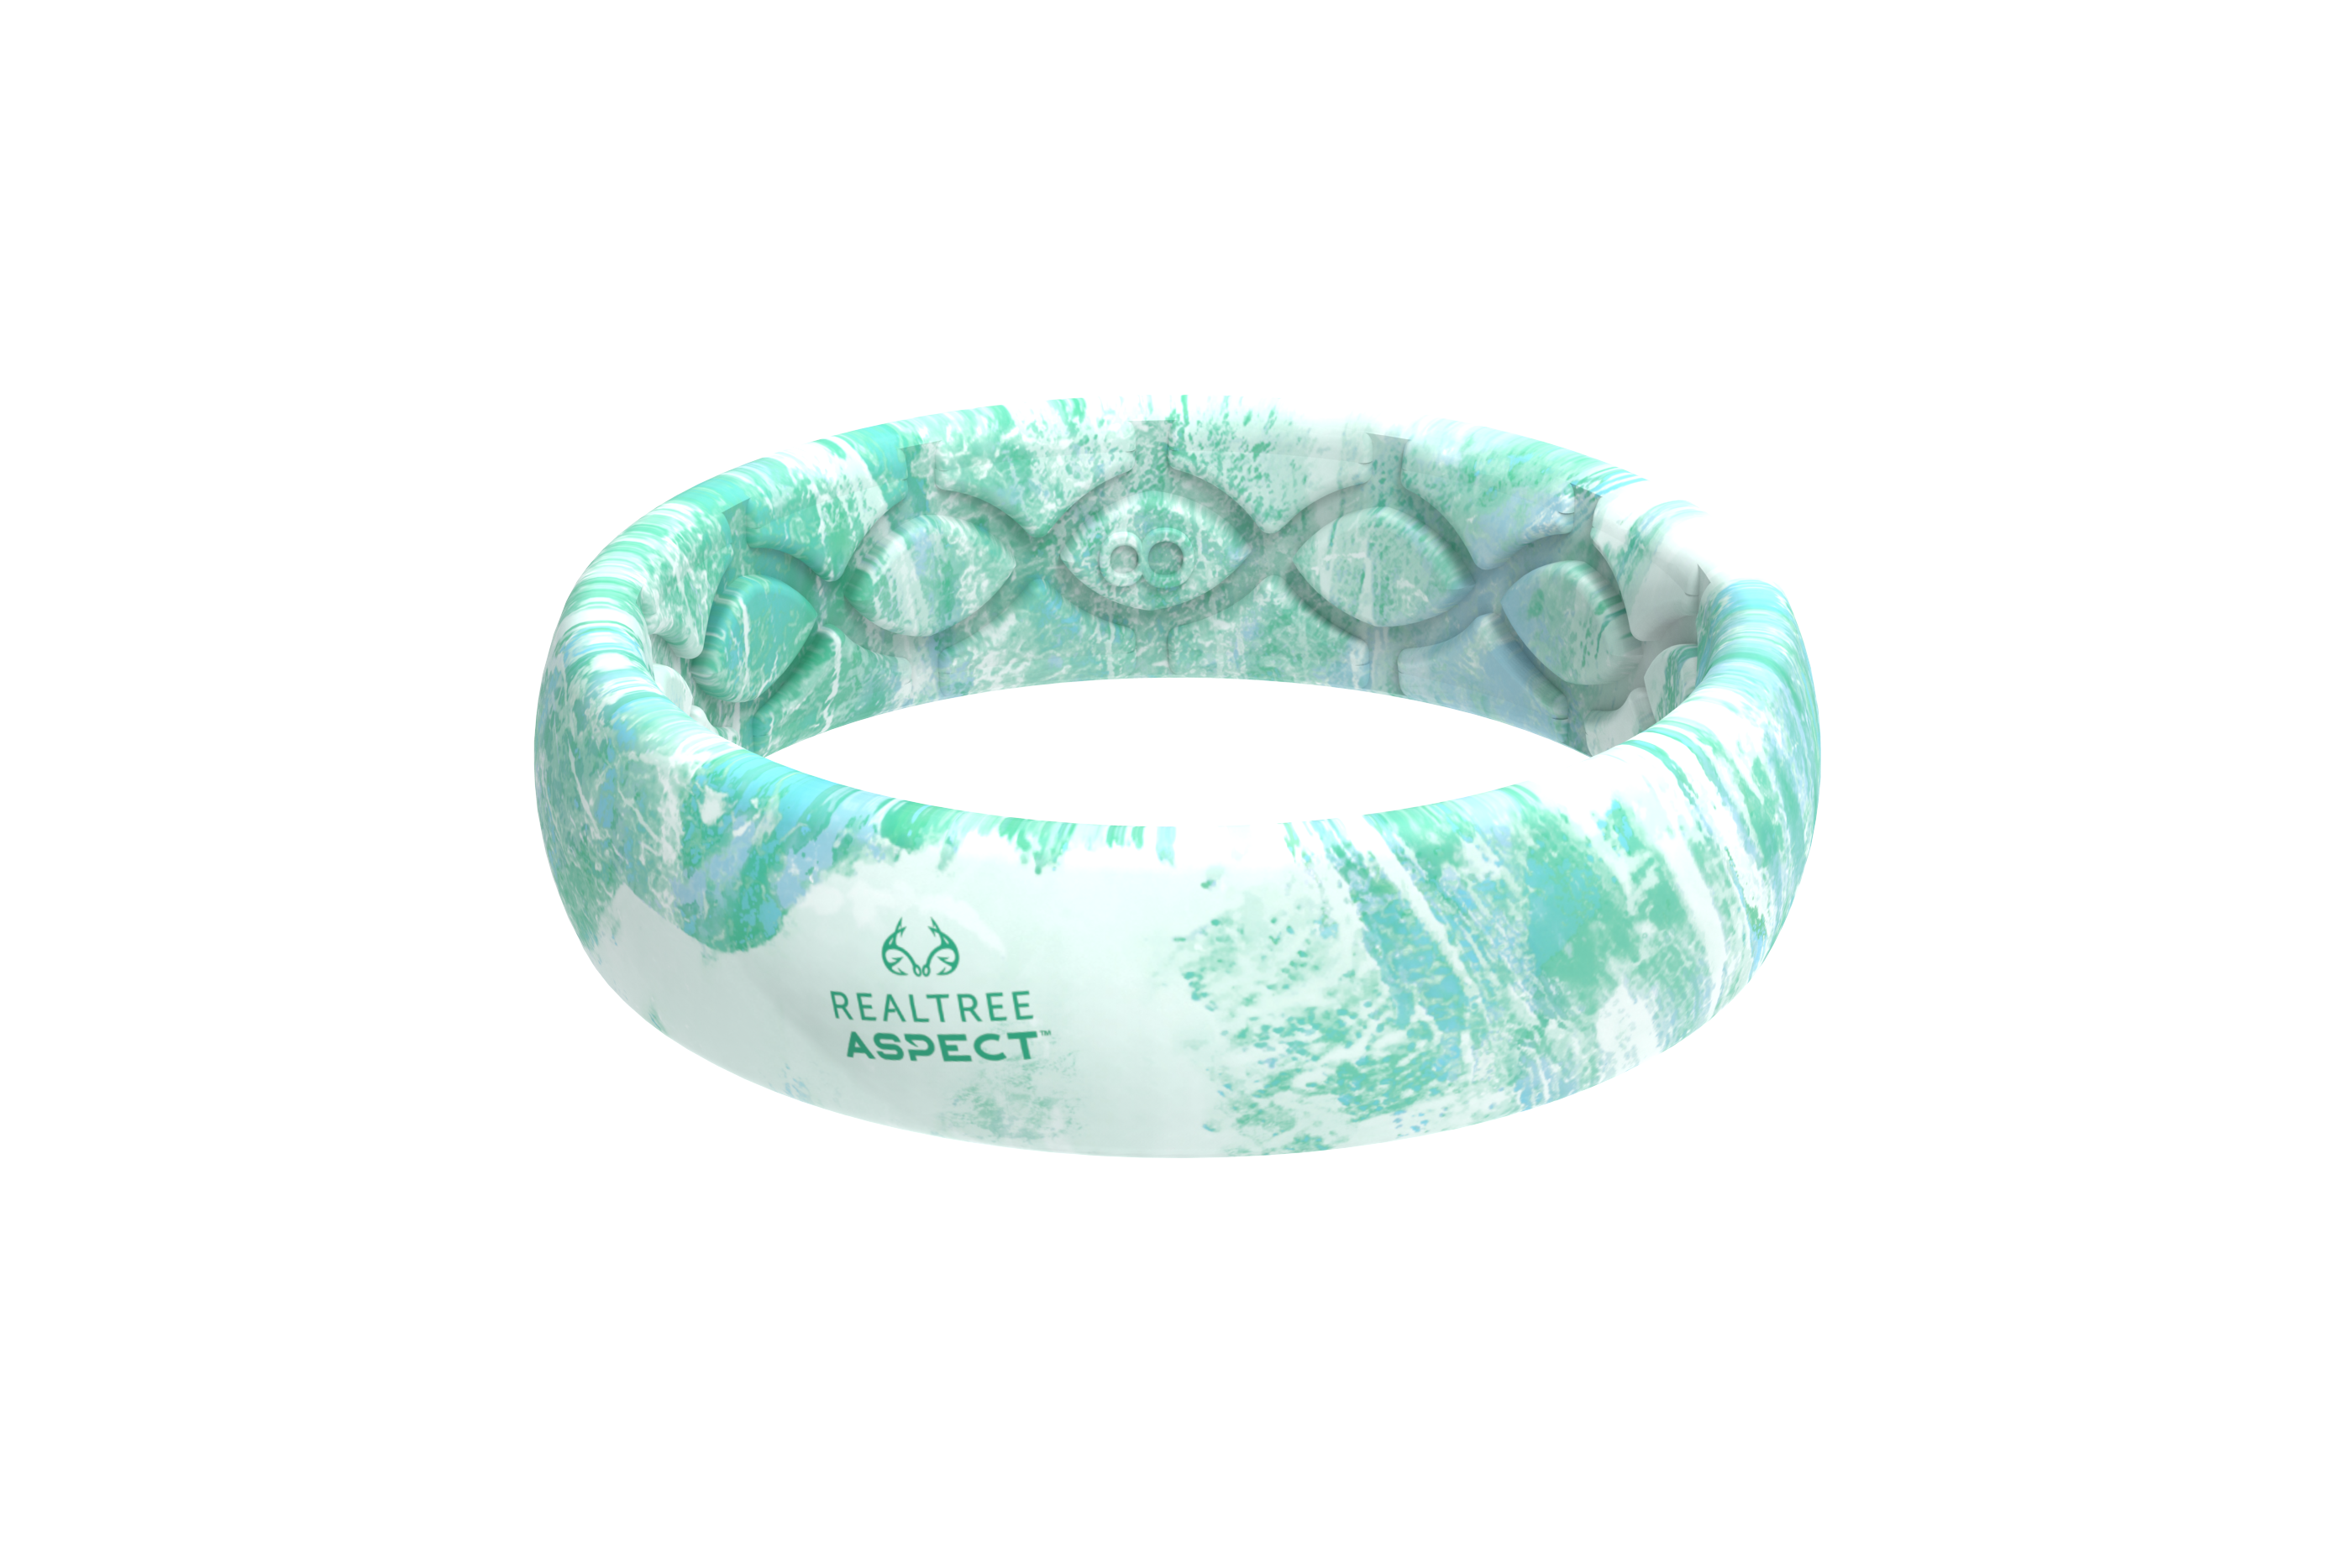 Realtree Aspect™ Teal Waters Thin Camo Ring viewed front on 